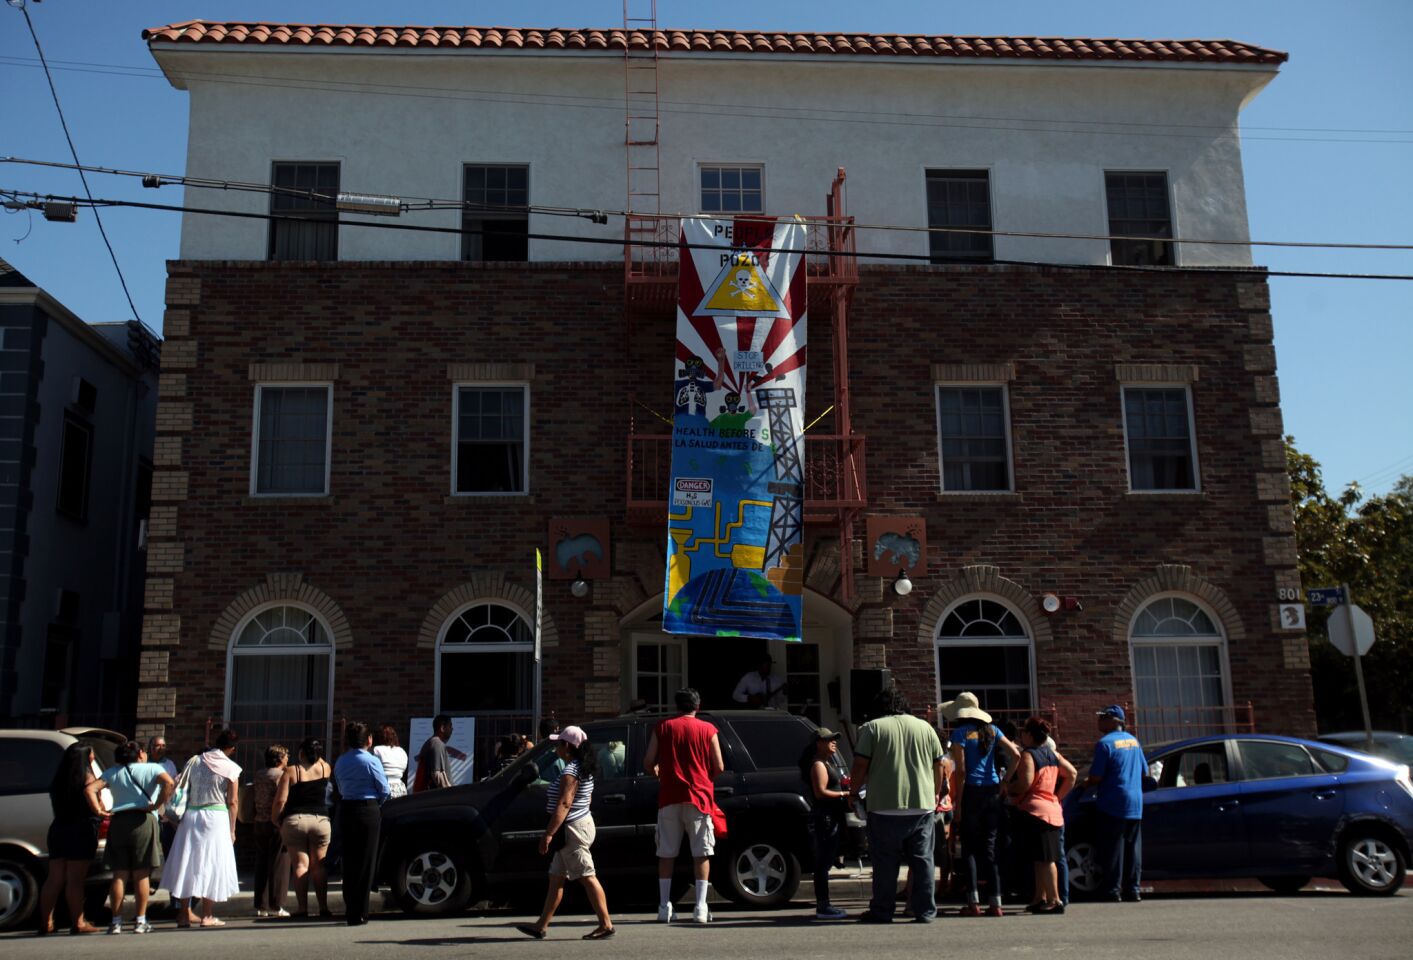 About 40 members of the community gather in front of Monic Uriarte's building in the University Park neighborhood. In what they called an "action," they hung a banner that read "People Not Pozos" ("People Not Wells") and spoke about the air quality in their community.